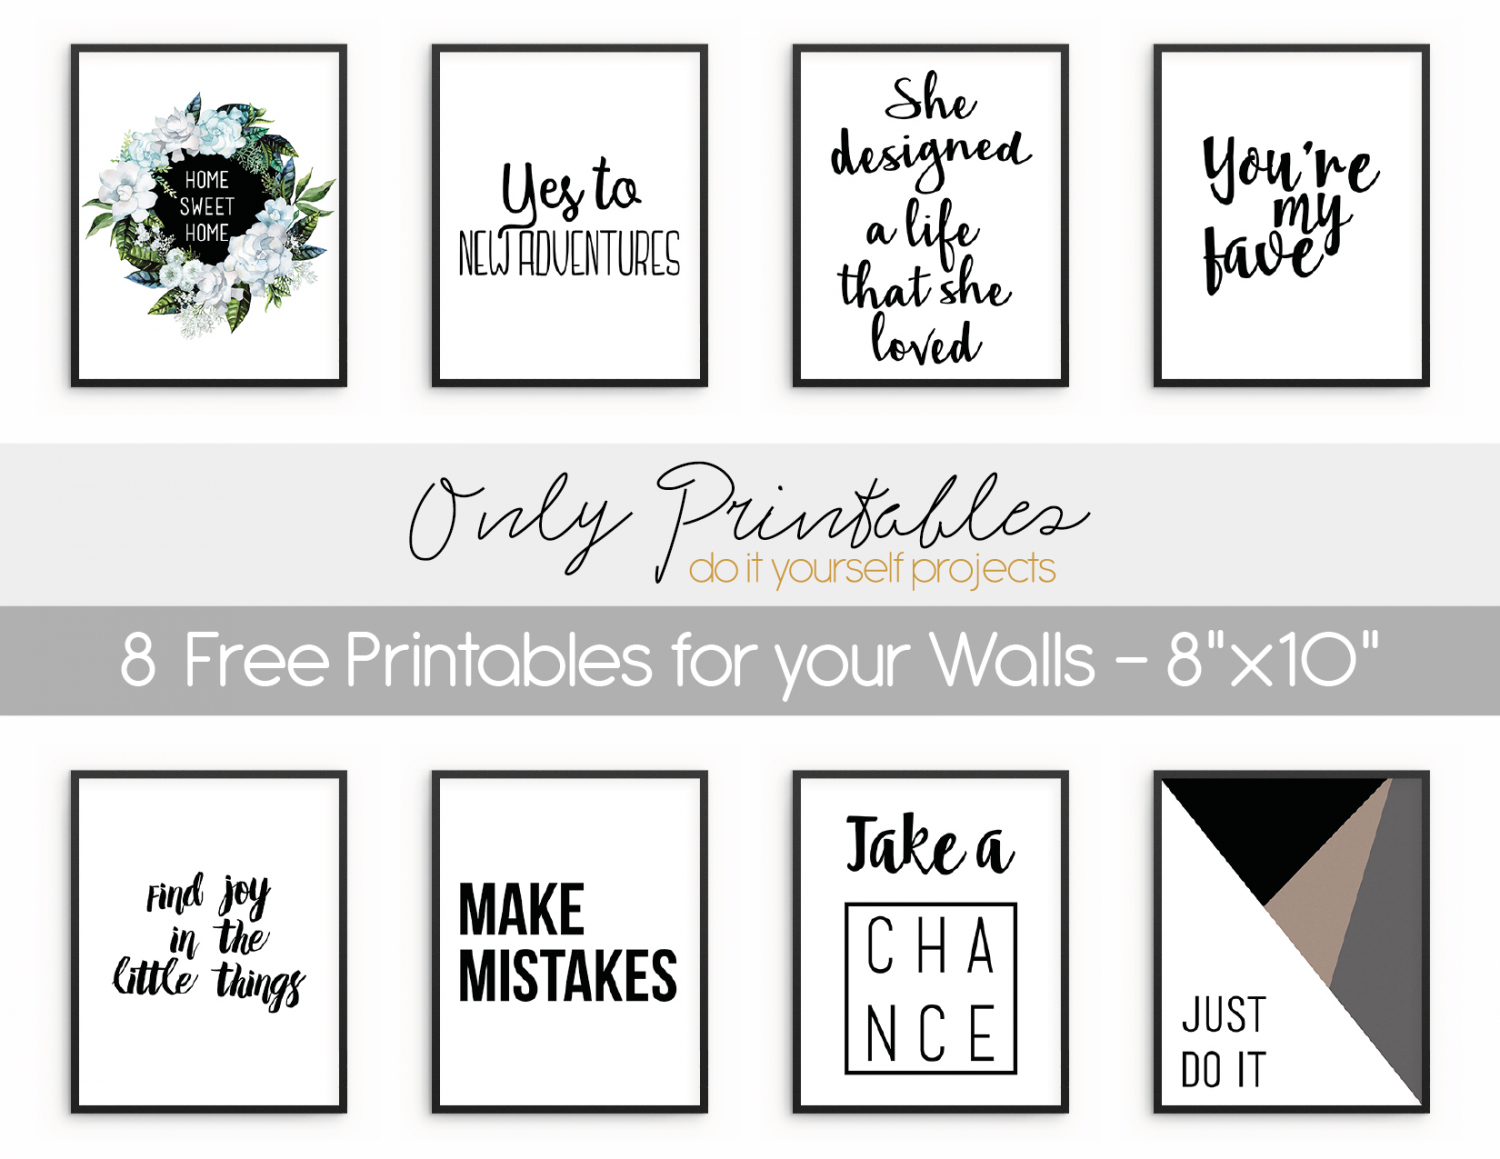 Only Printables | 8 Free Printables For Your Walls - Free Printable Wall Art